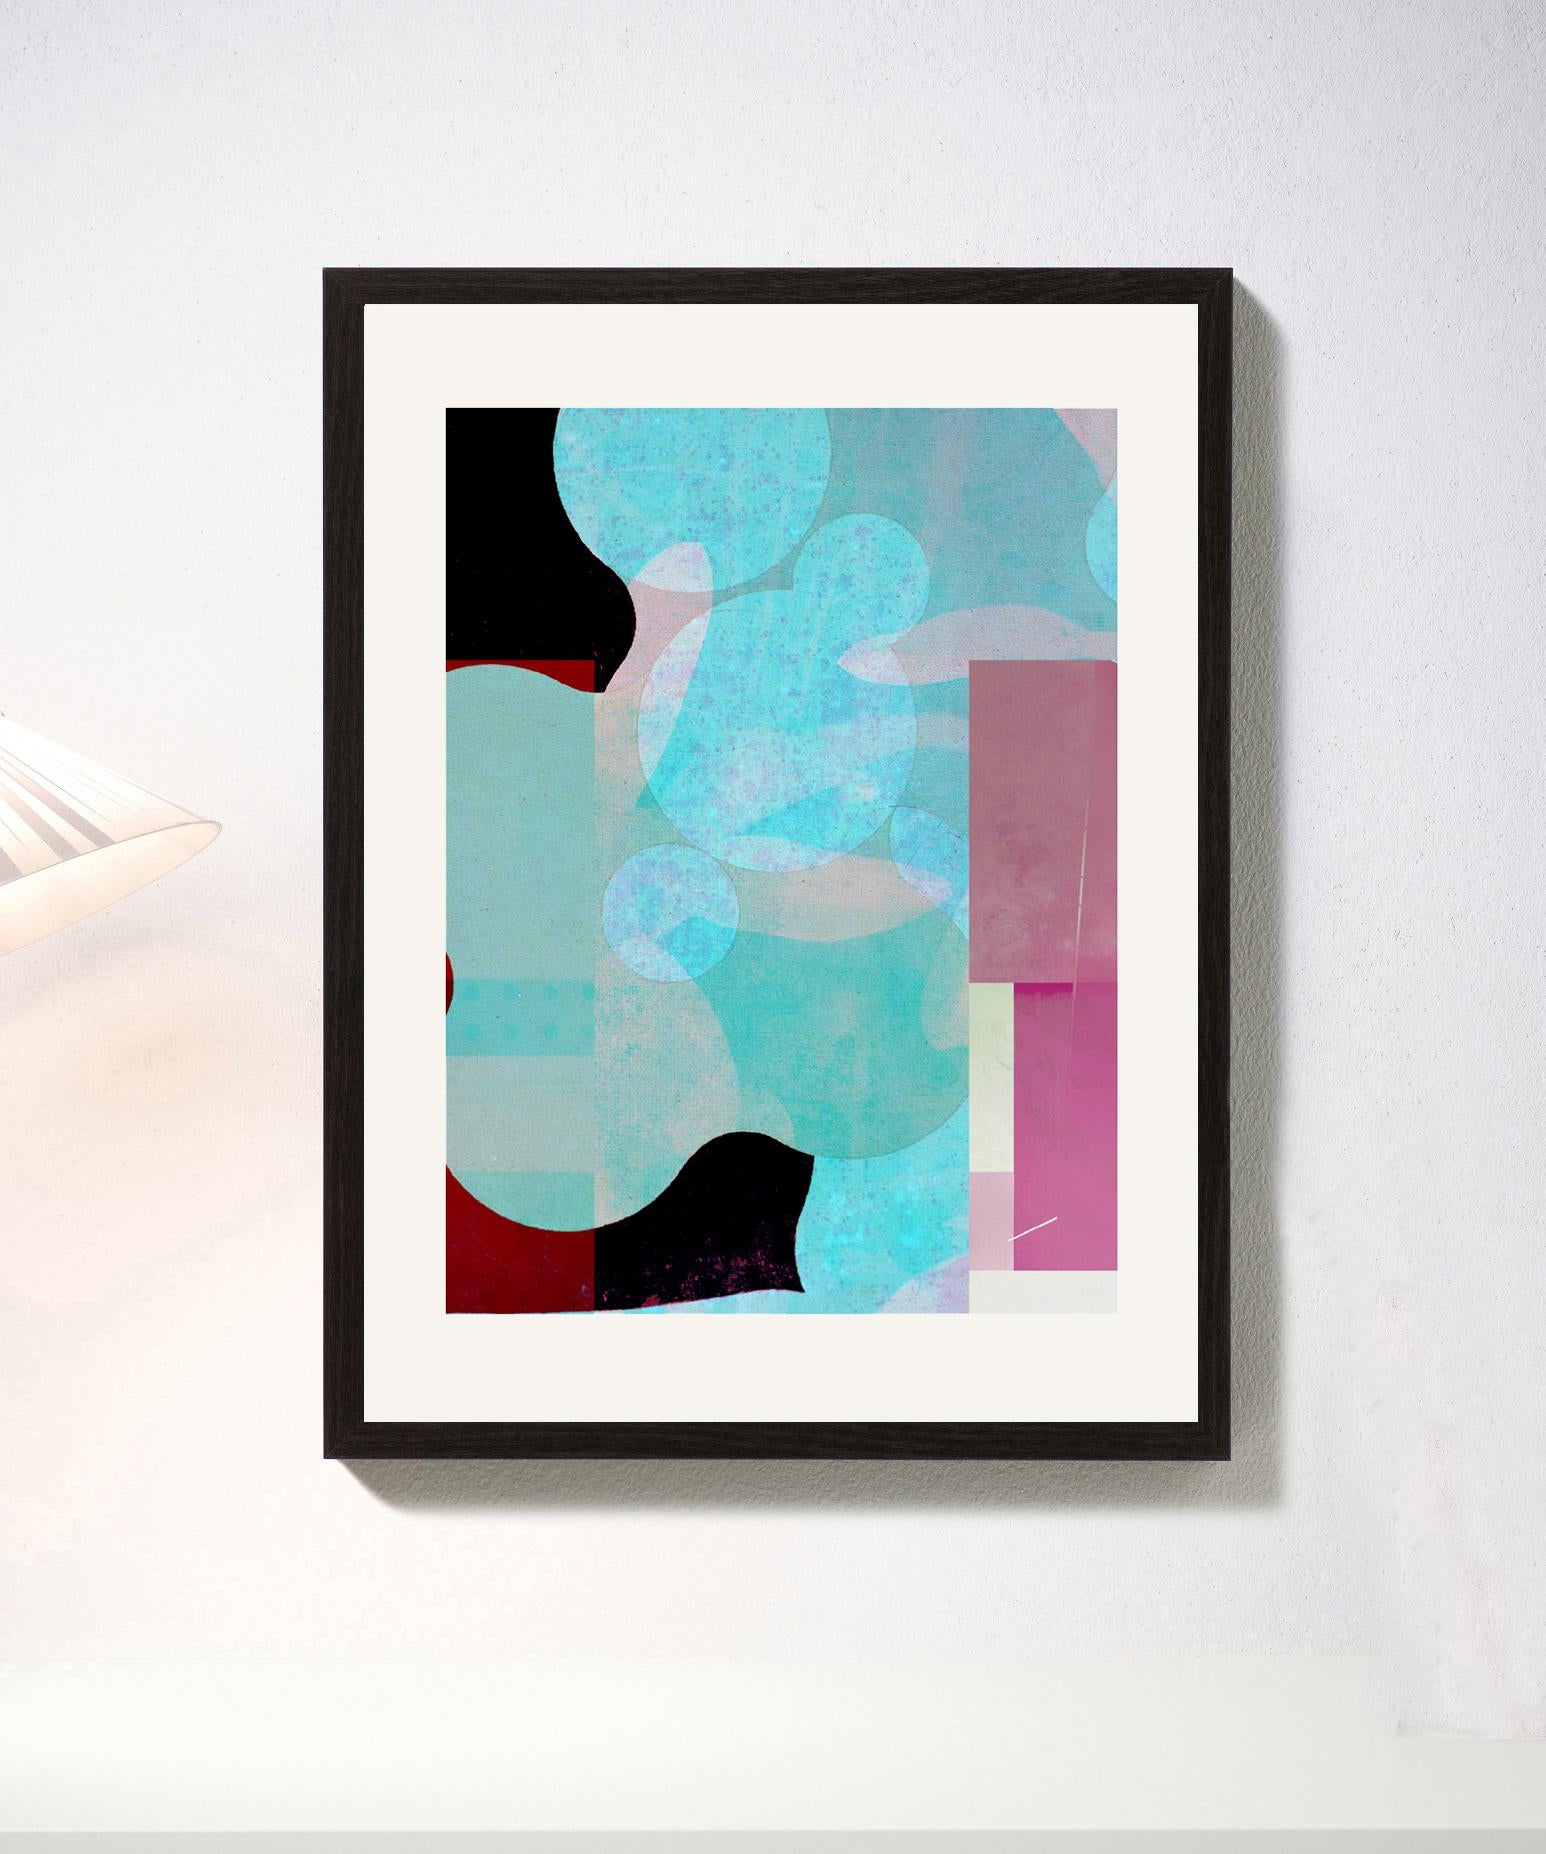 Blue & pink - Contemporary, Abstract, Expressionism, Modern, Pop art, Geometric - Print by Francisco Nicolás